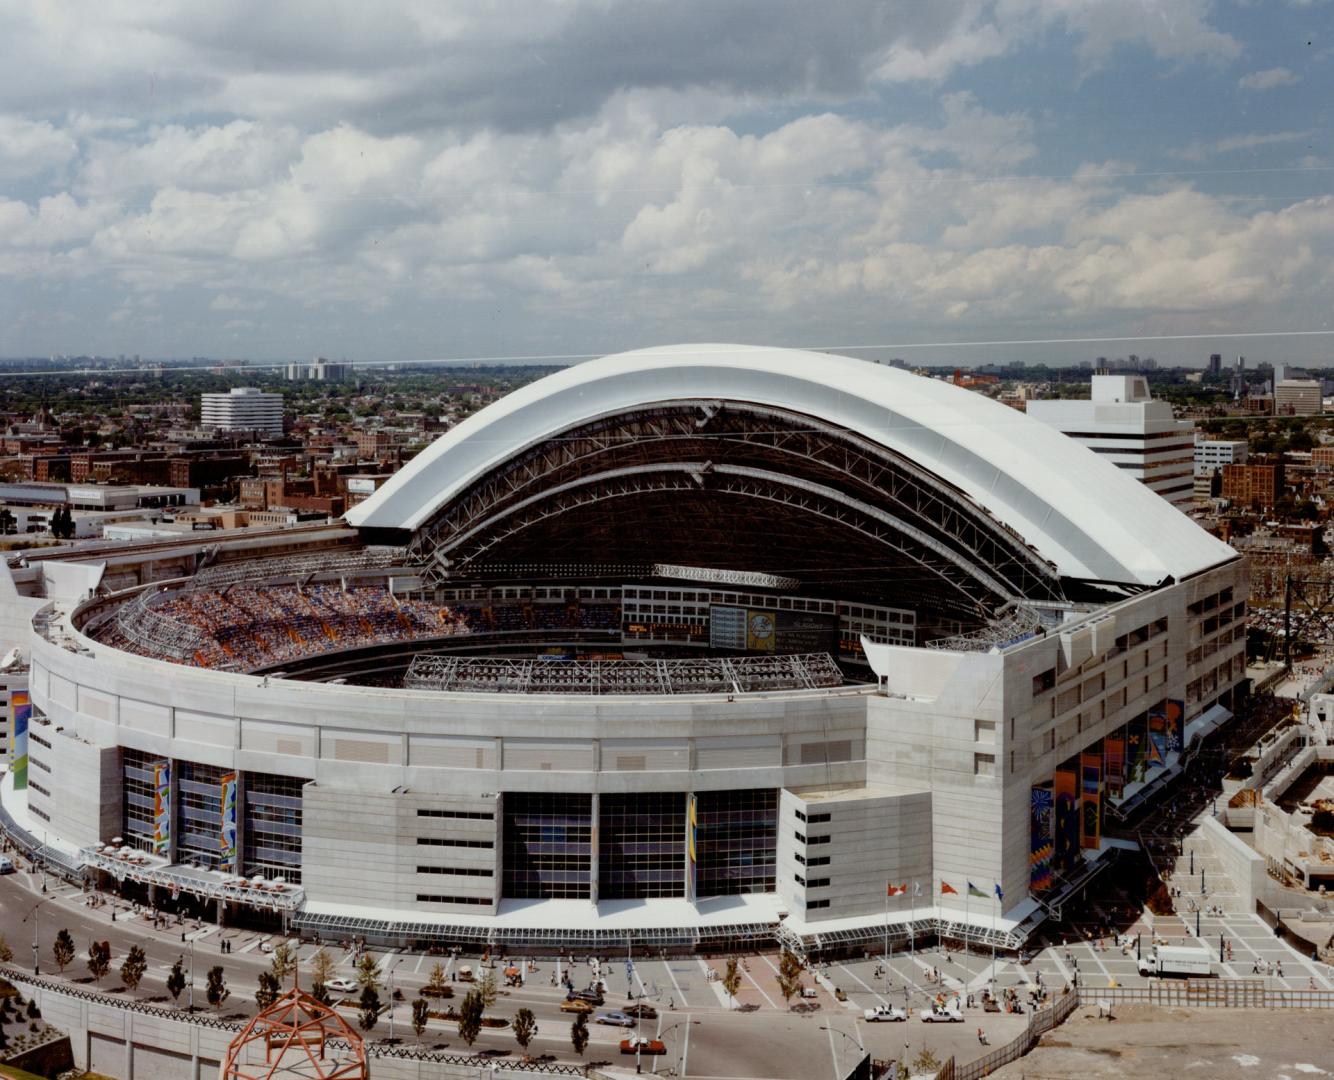 A Short History of the World's First Retractable Stadium Roof